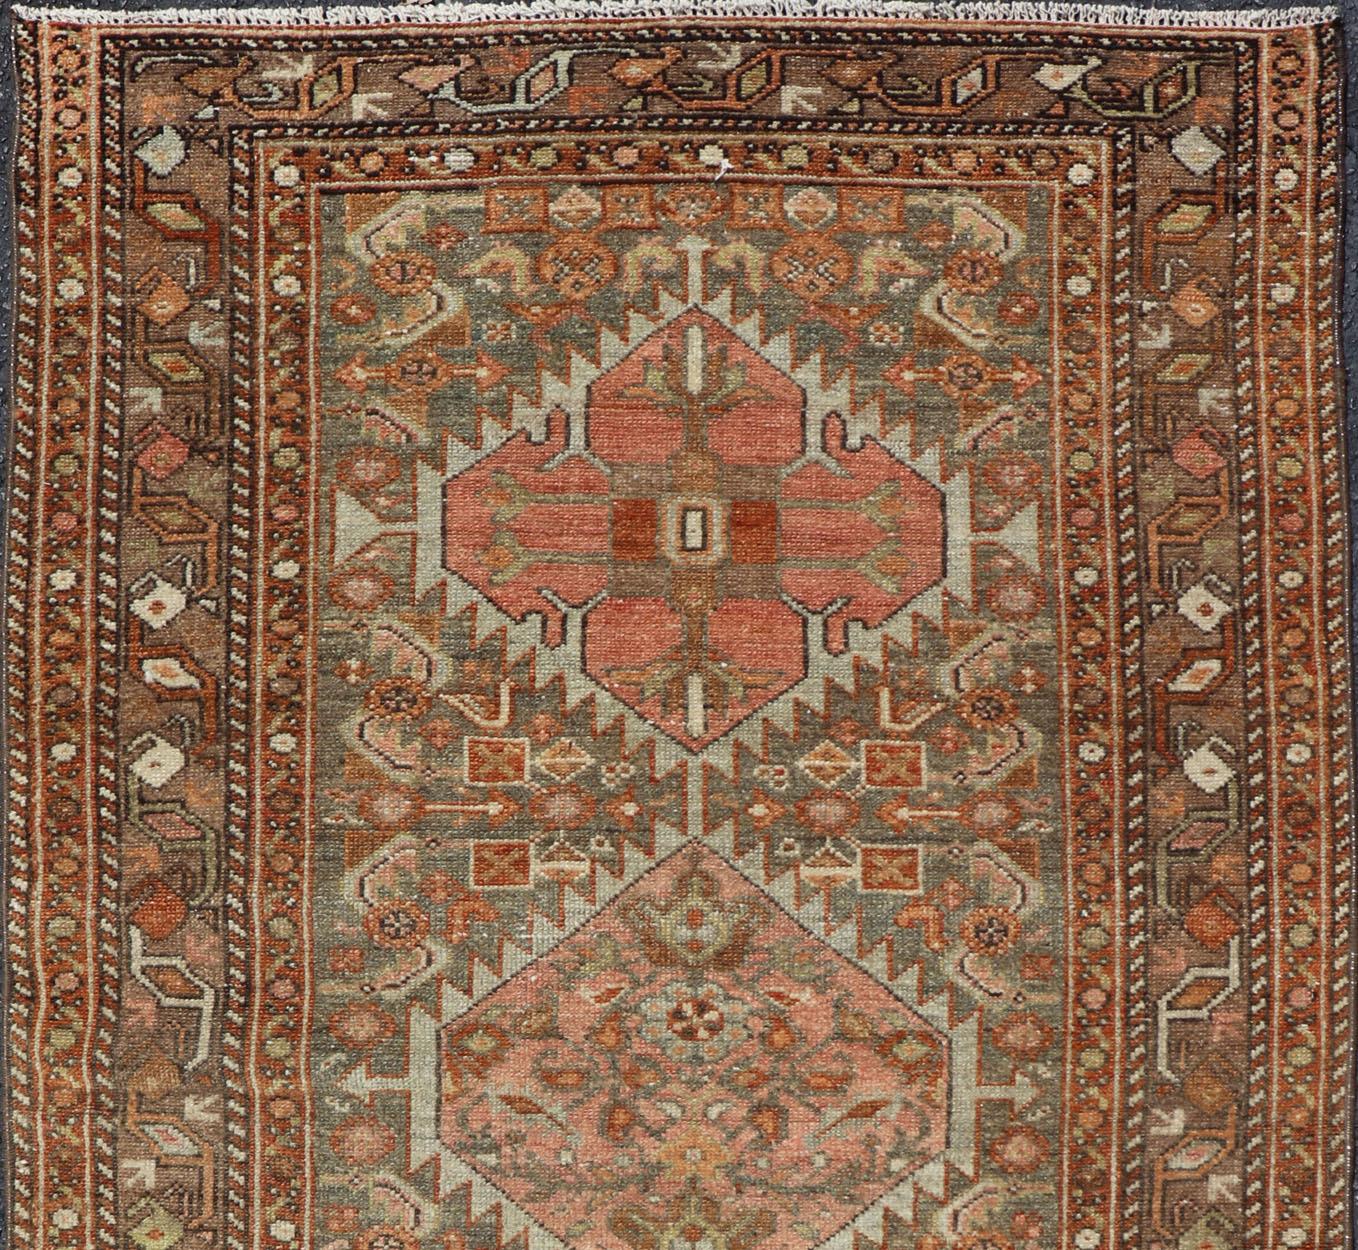 Hand-Knotted Antique Persian Hamedan in Rustic Earthy Tones With Tribal Medallions For Sale